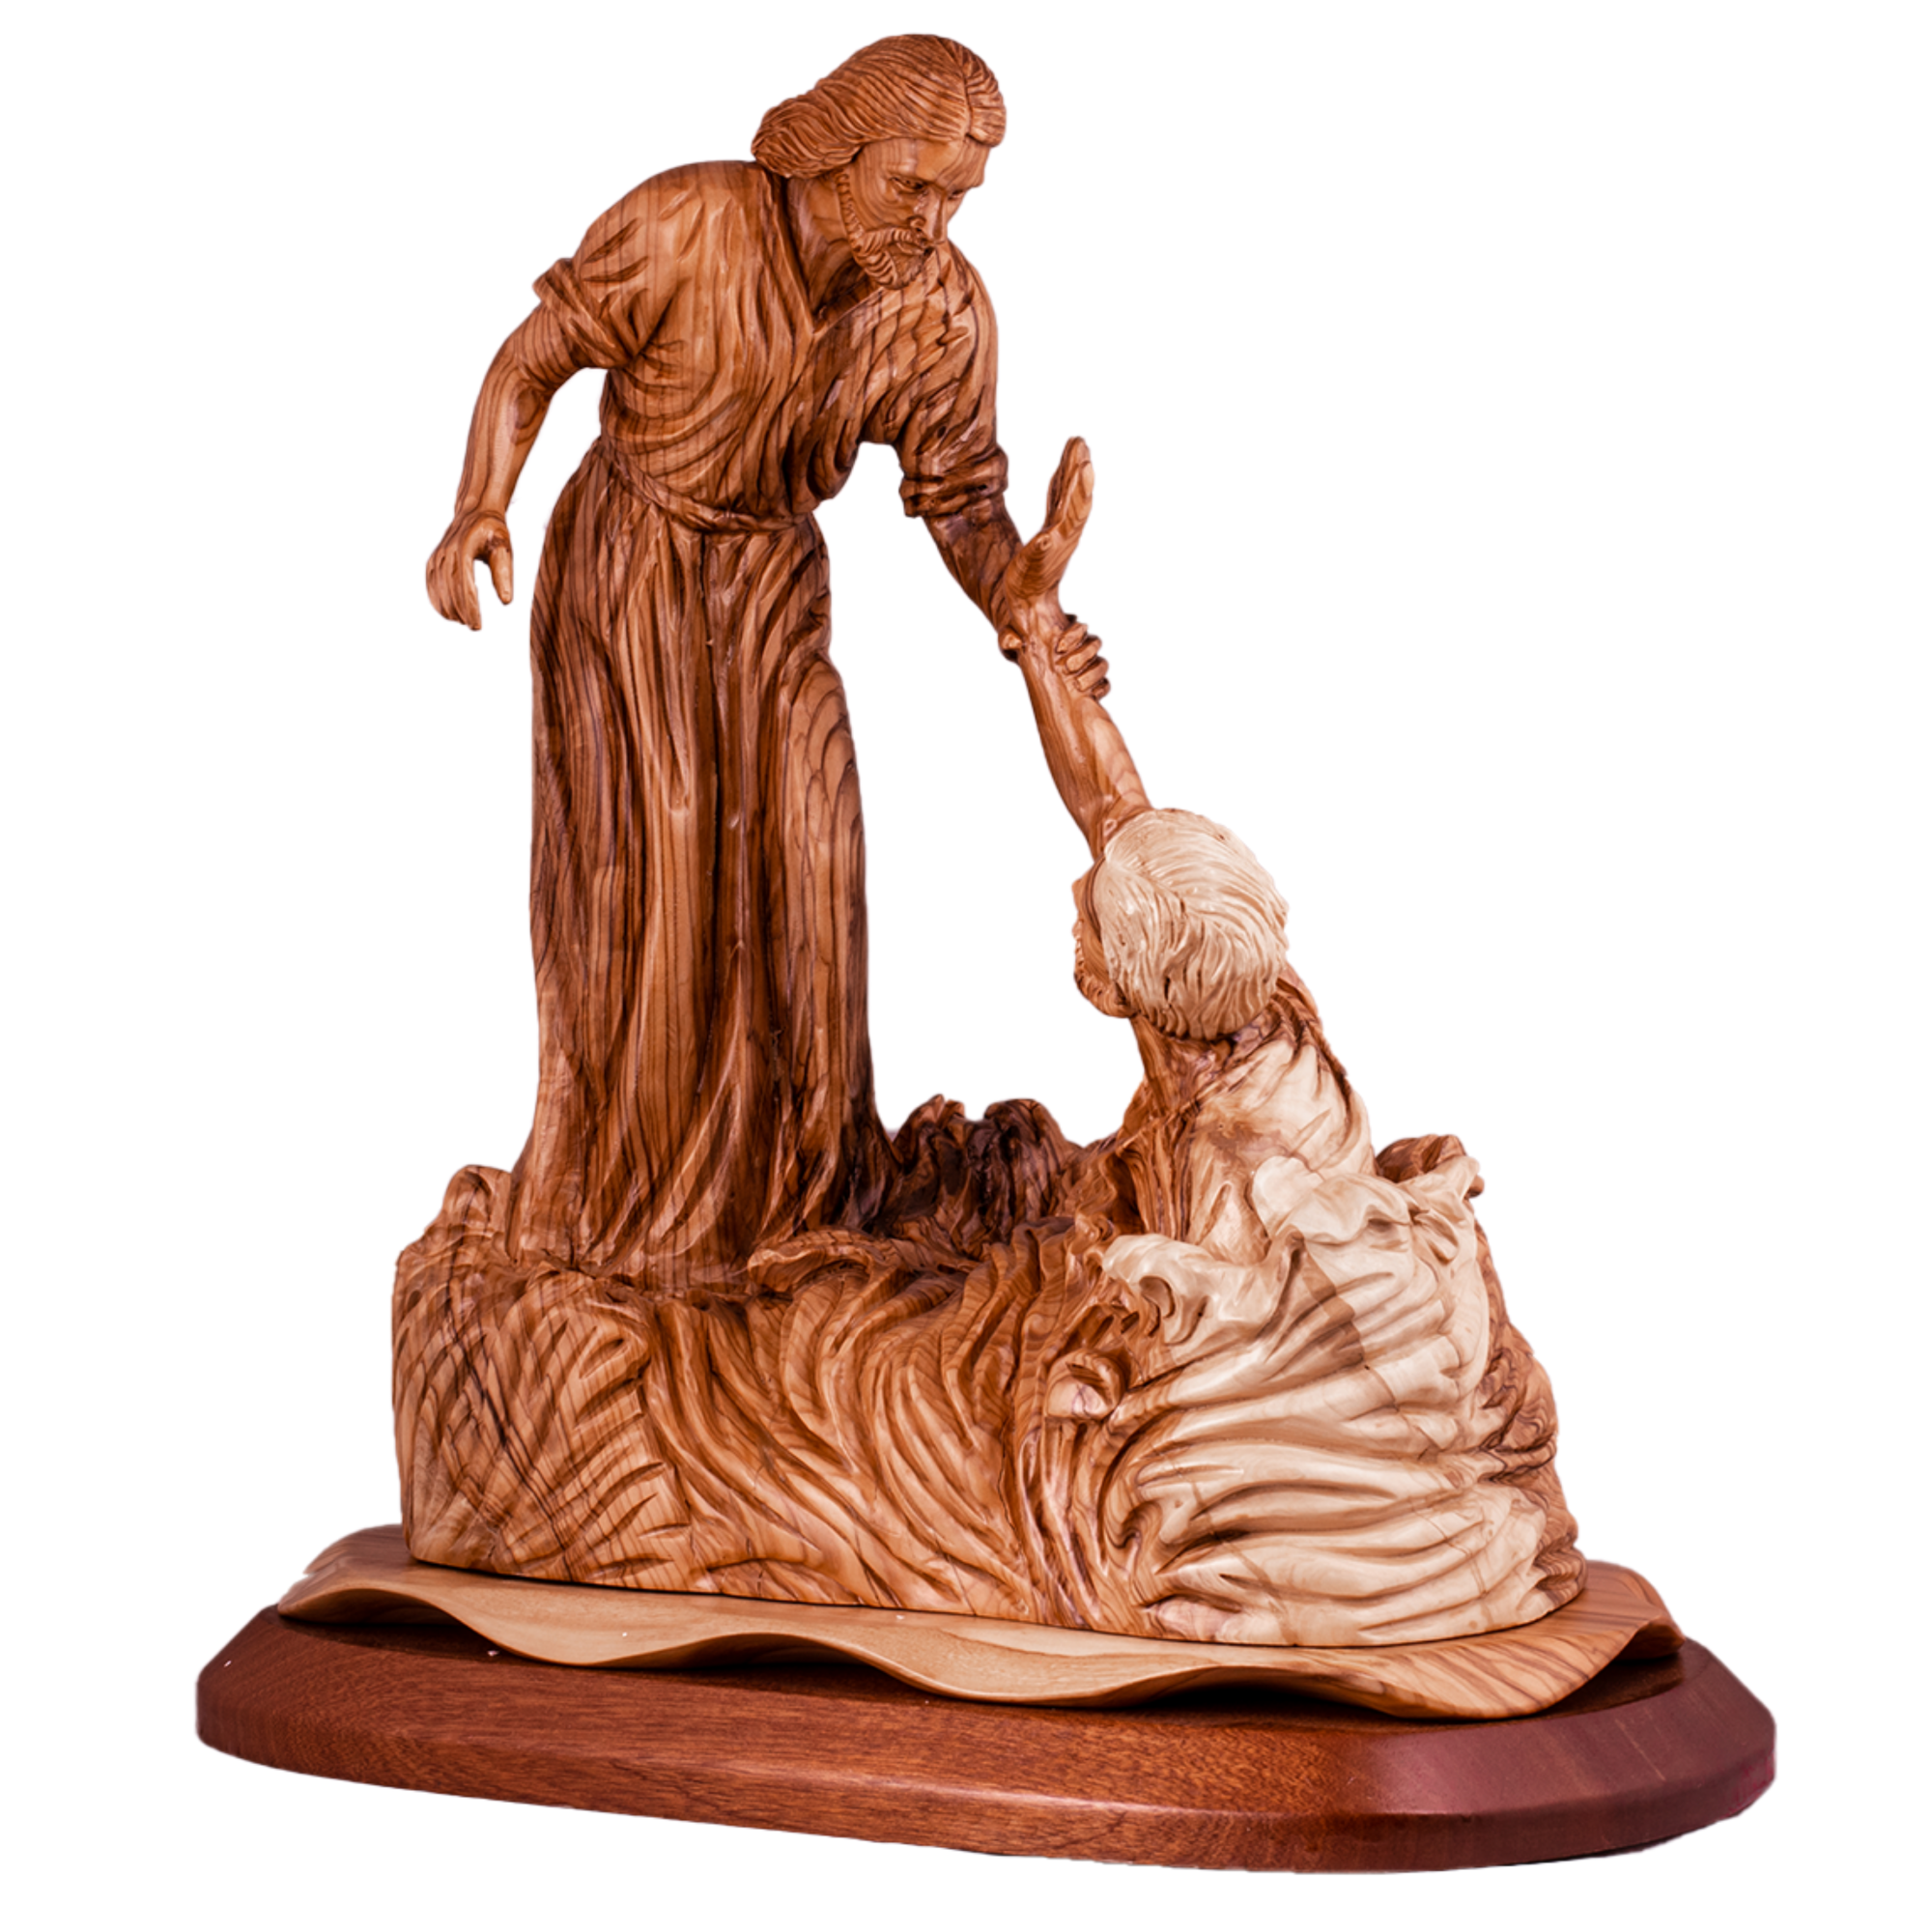 Jesus pulling peter out of the water. Cathedral Quality, Size: 14" x 8.5" x 5"